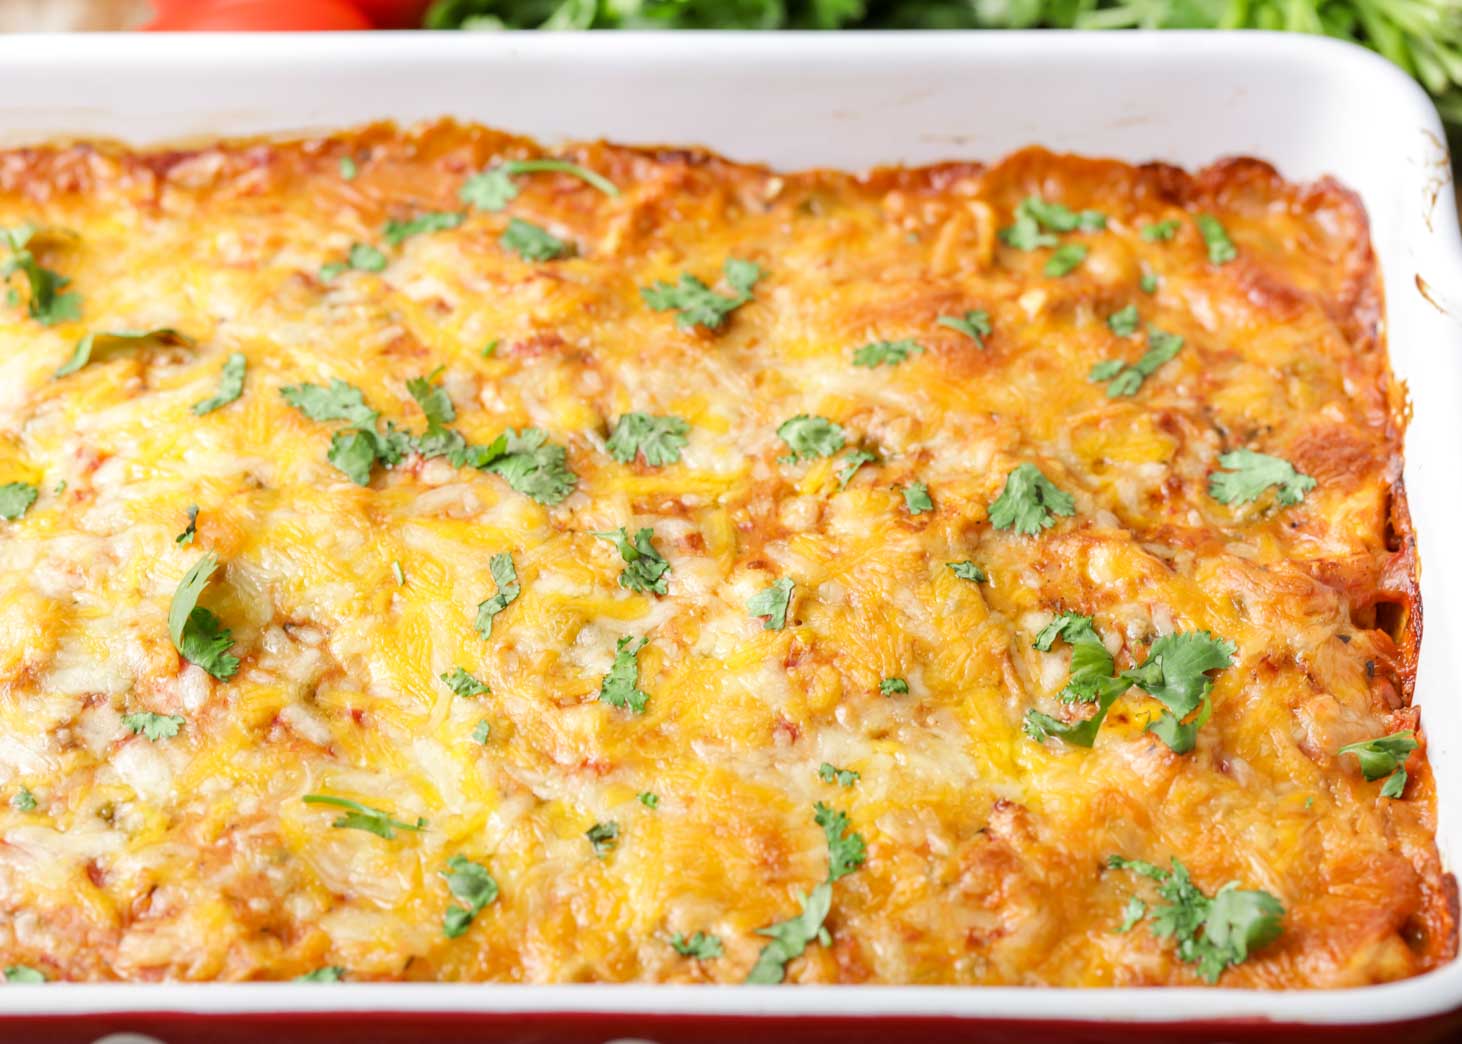 Easy Dinner Ideas - Mexican casserole served in a white baking dish.